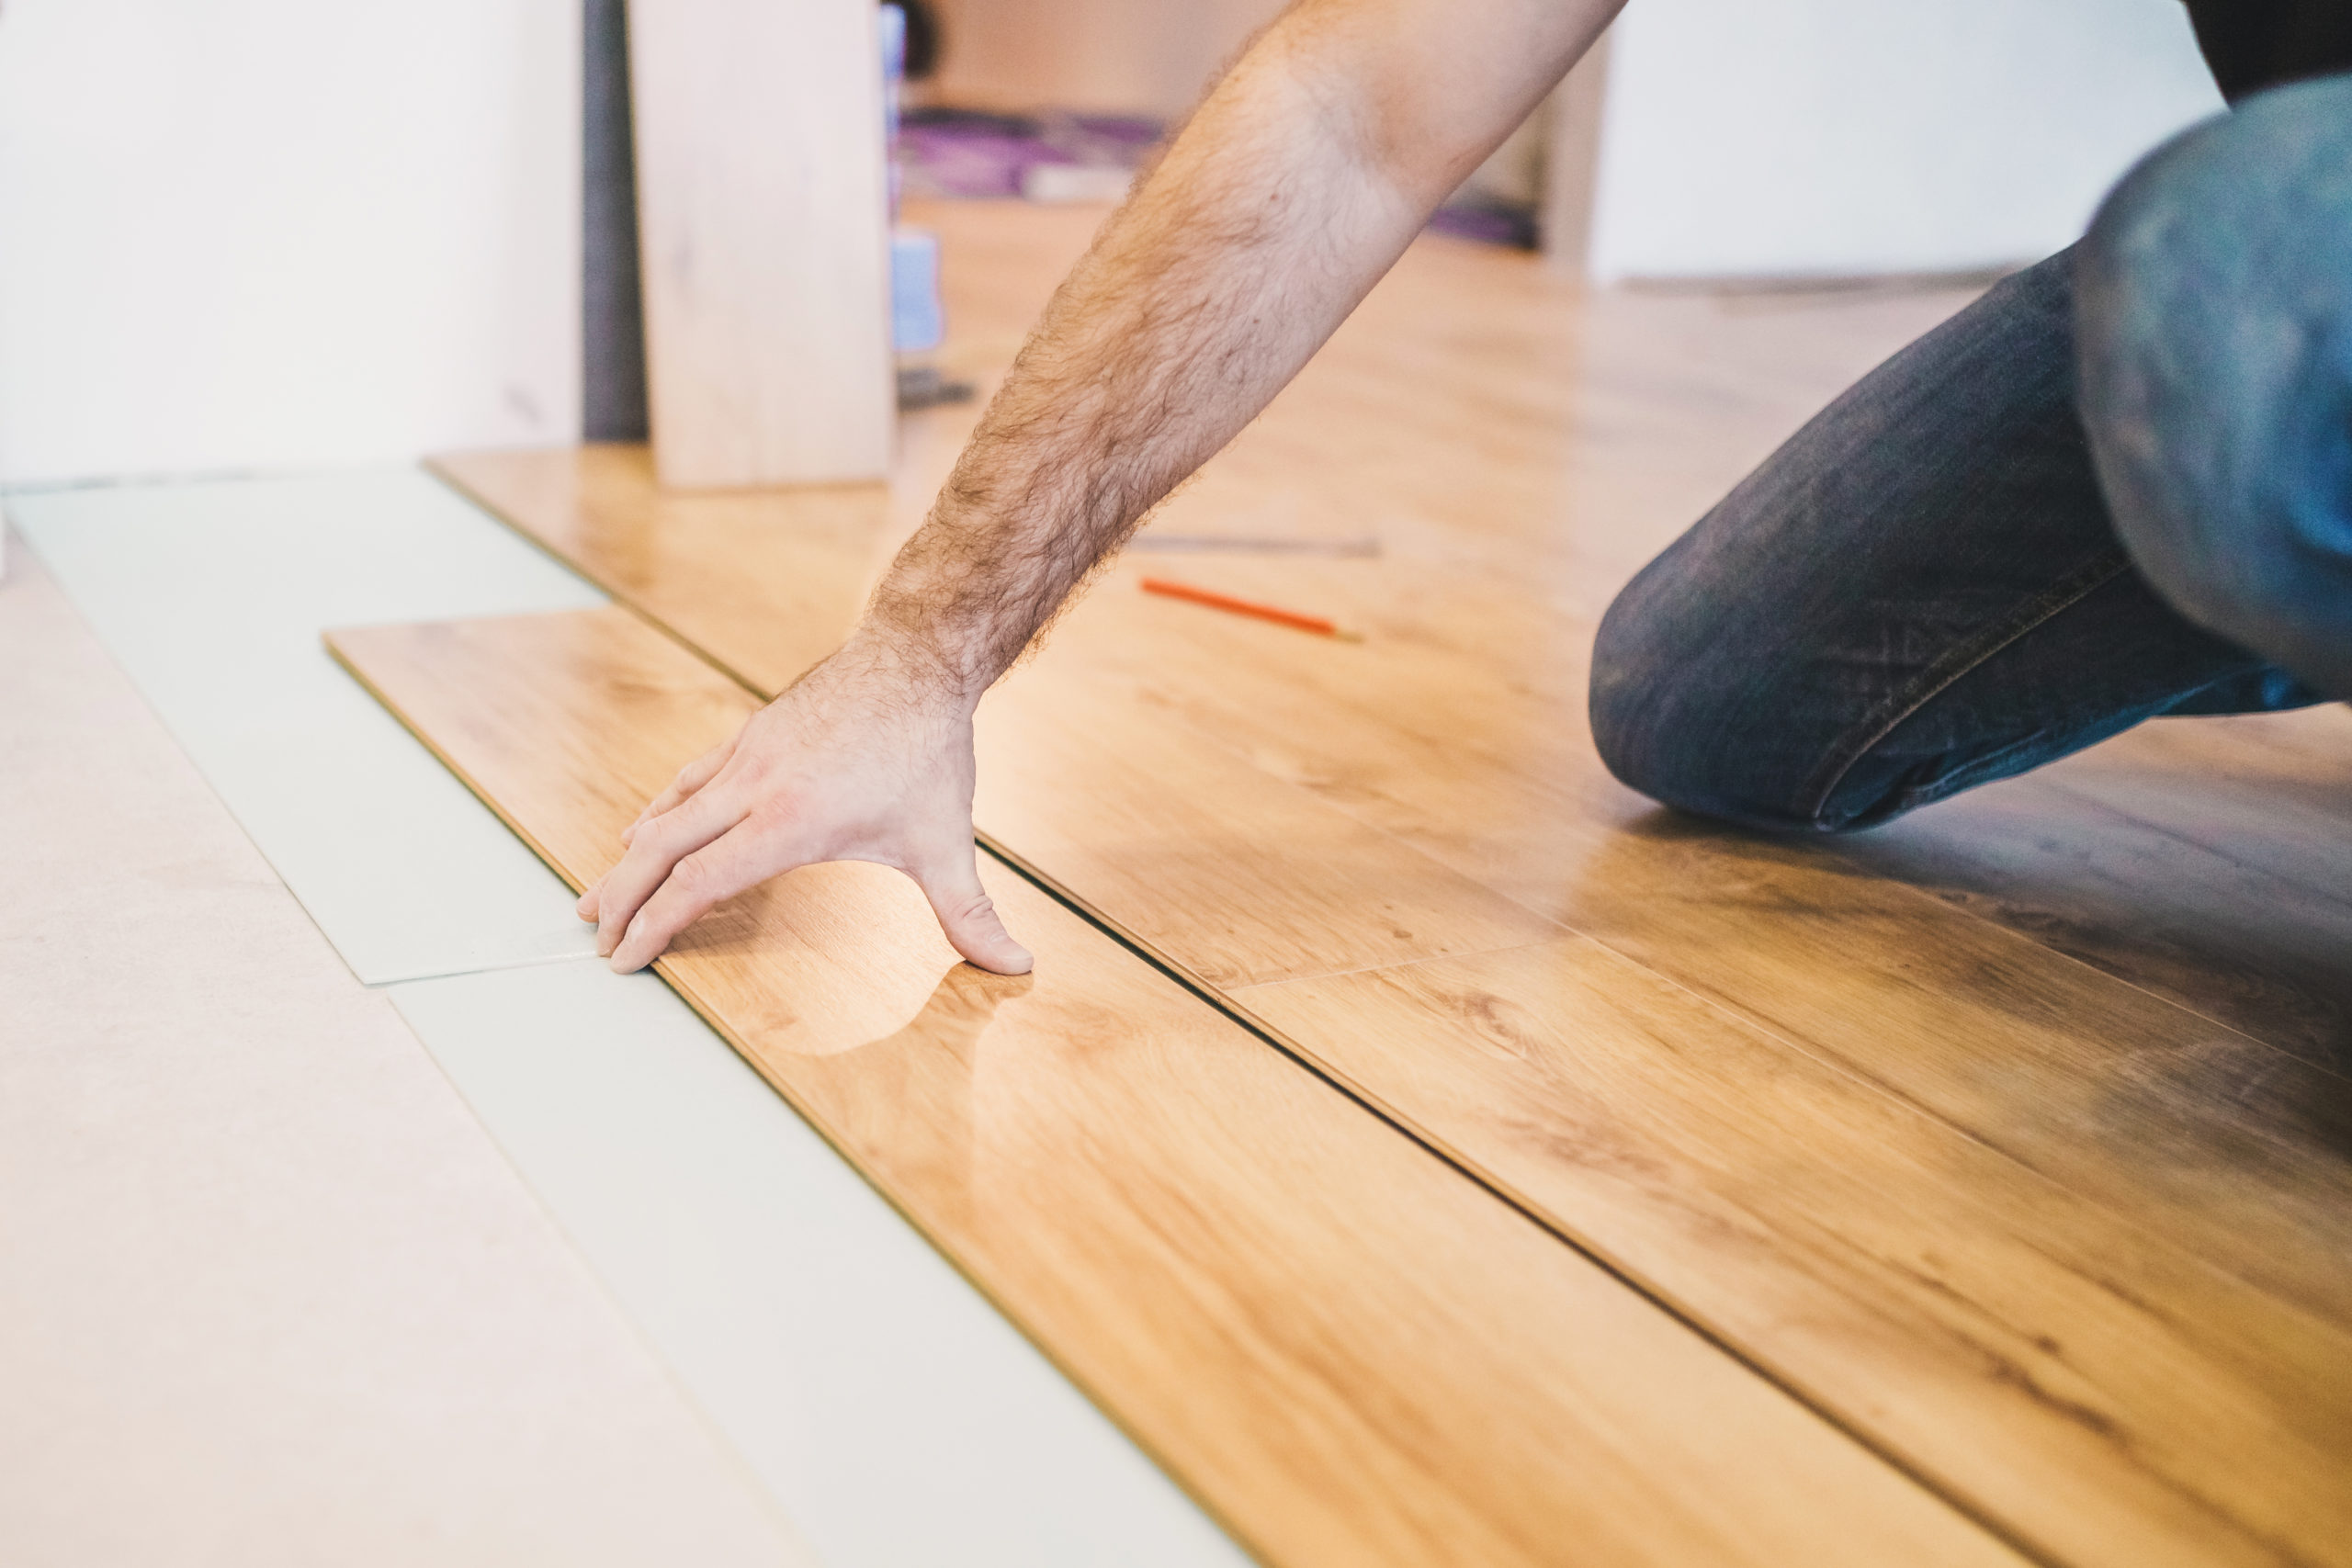 Imitation of a wooden floor - an inexpensive qualitative laminate